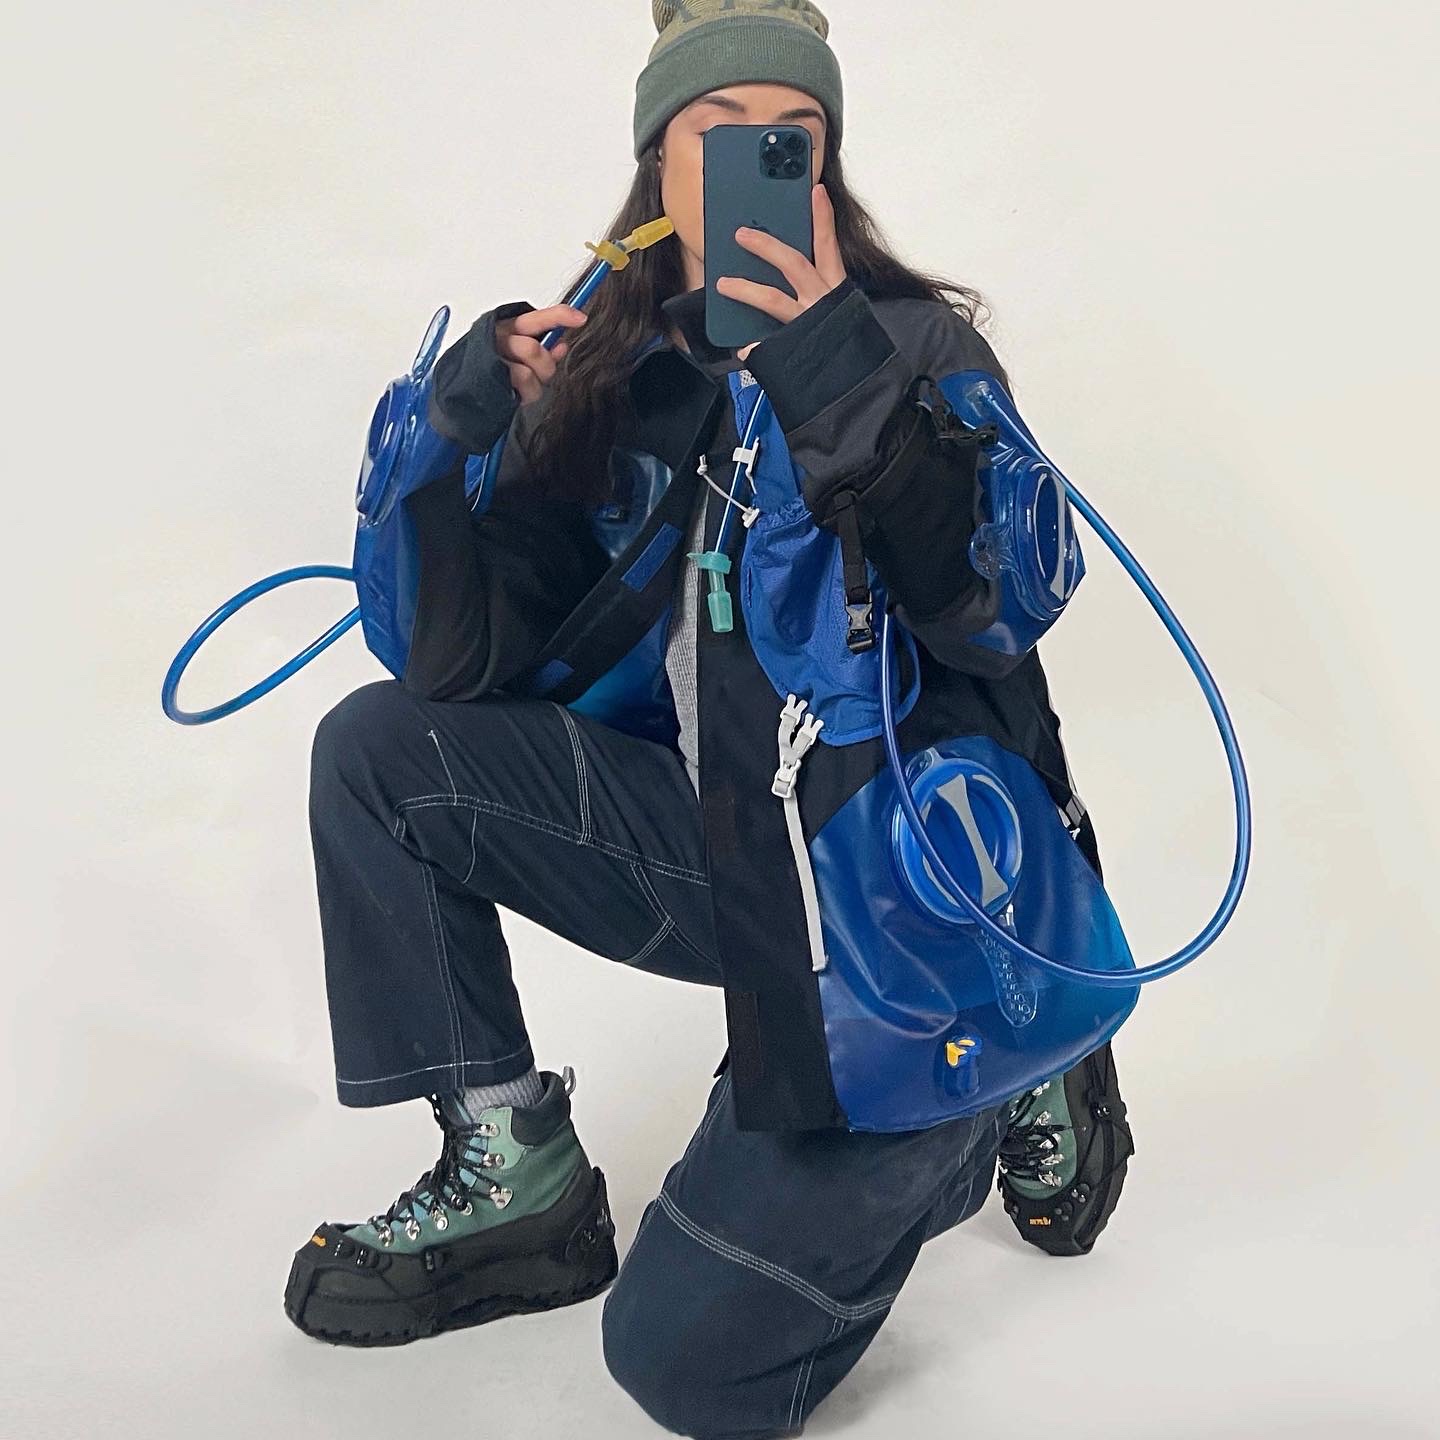 model wearing a jack made from CamelBak water reservoirs